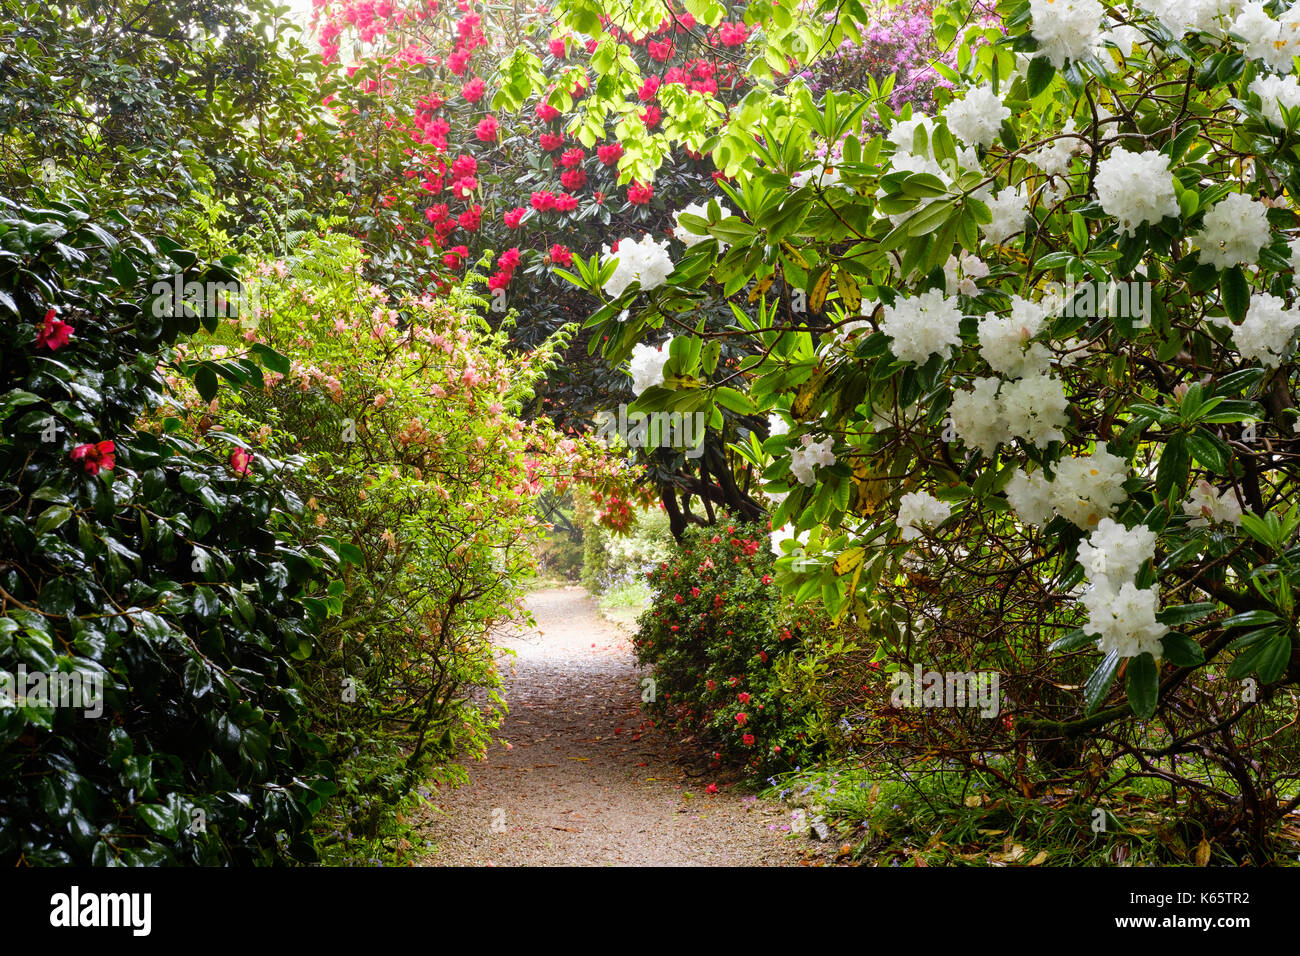 Path through blooming rhododendrons, Trengwainton Garden, near Penzance, Cornwall, England, Great Britain Stock Photo